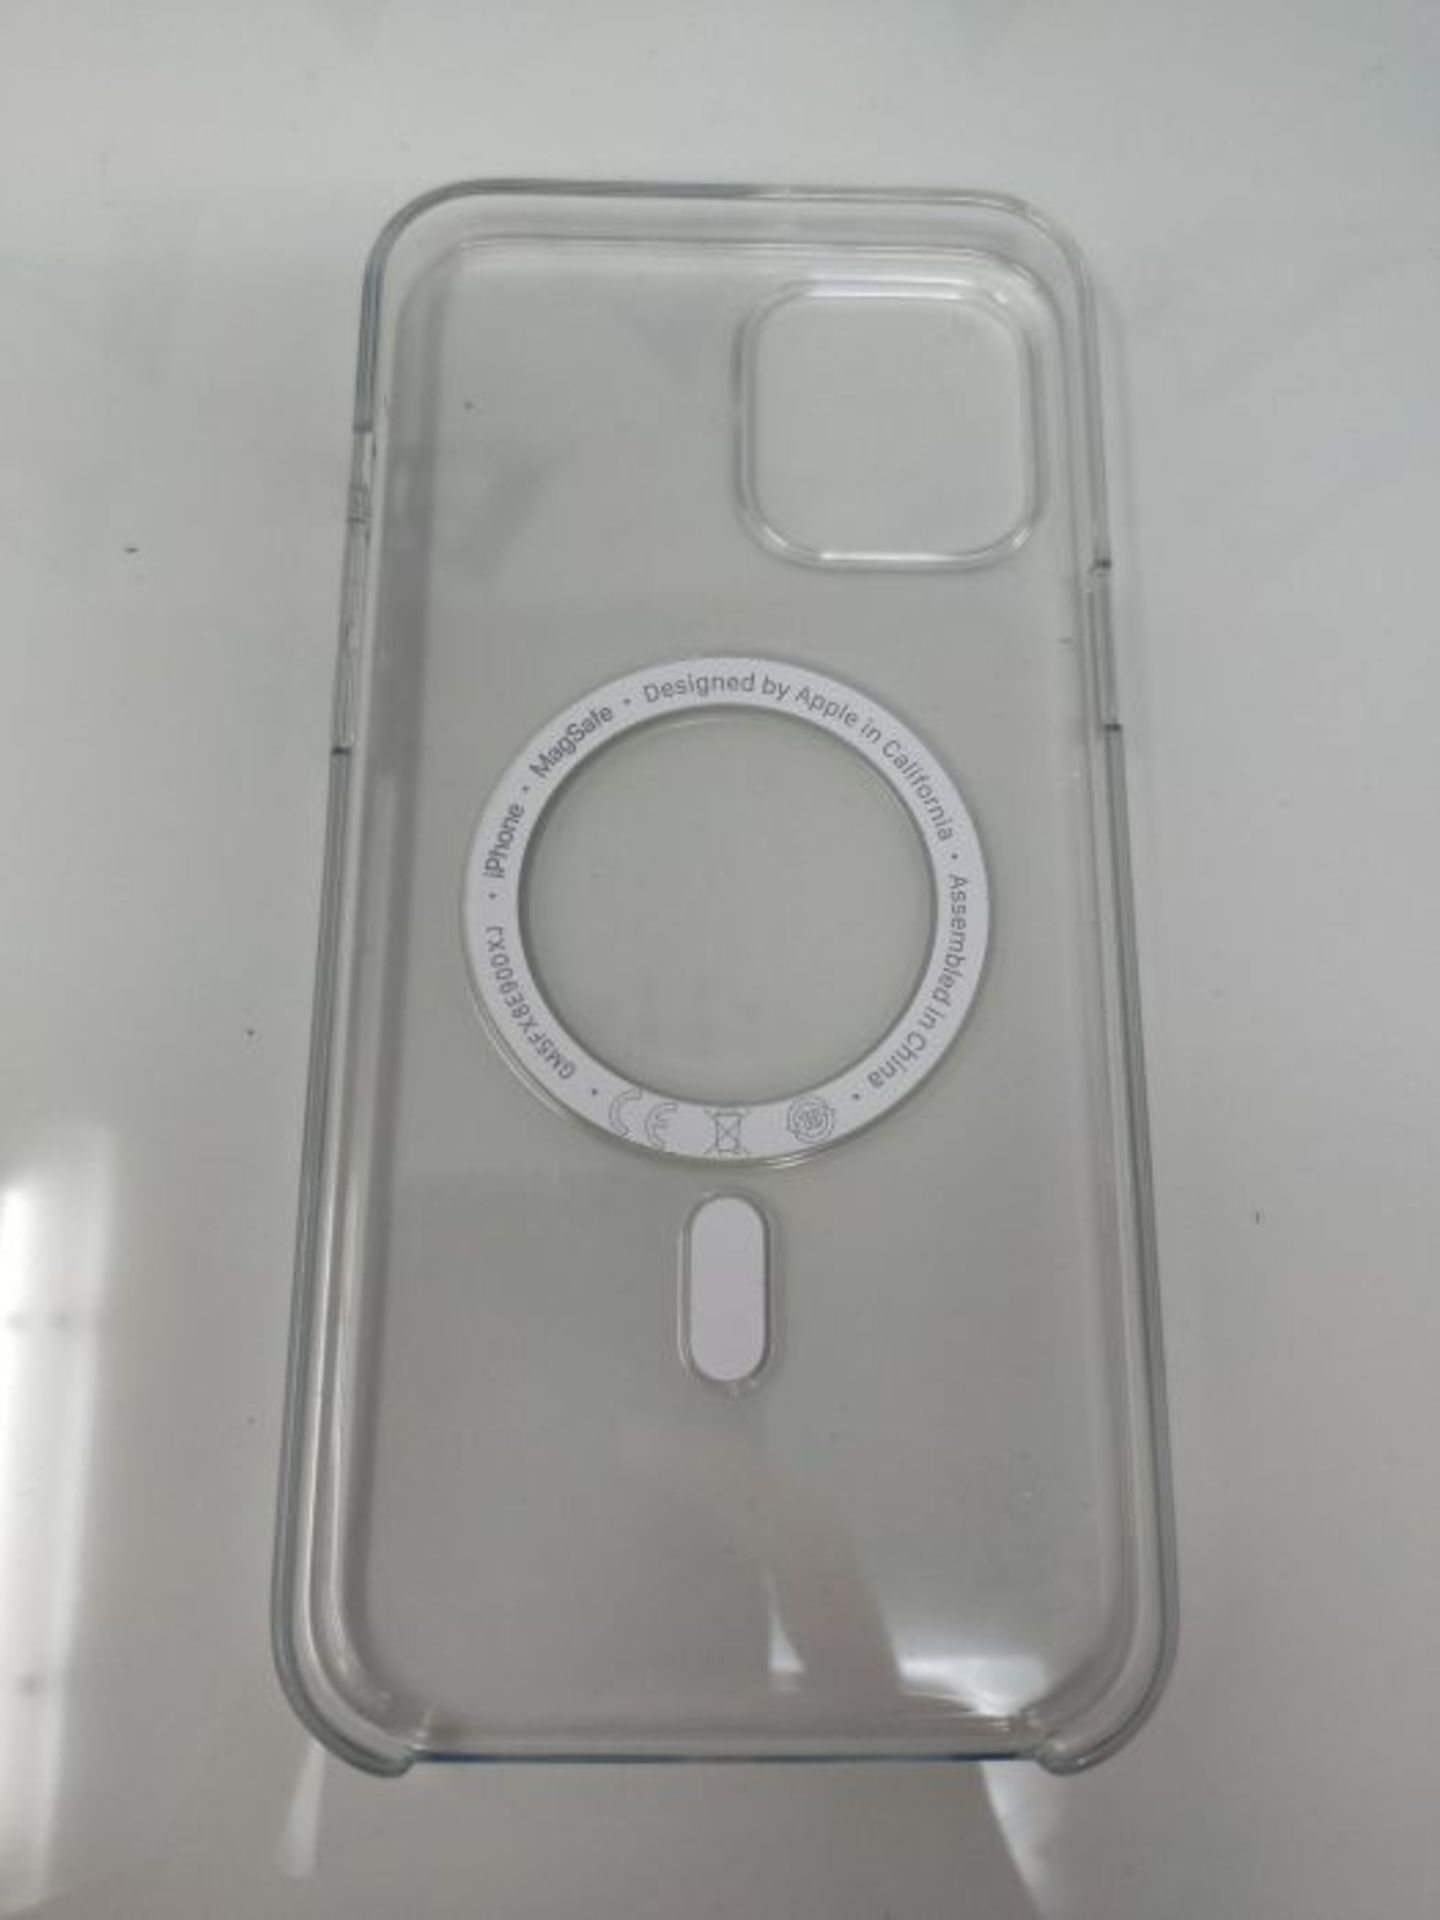 Apple Clear Case (for iPhone 12 Pro Max) - 6.68 inches - Image 2 of 2